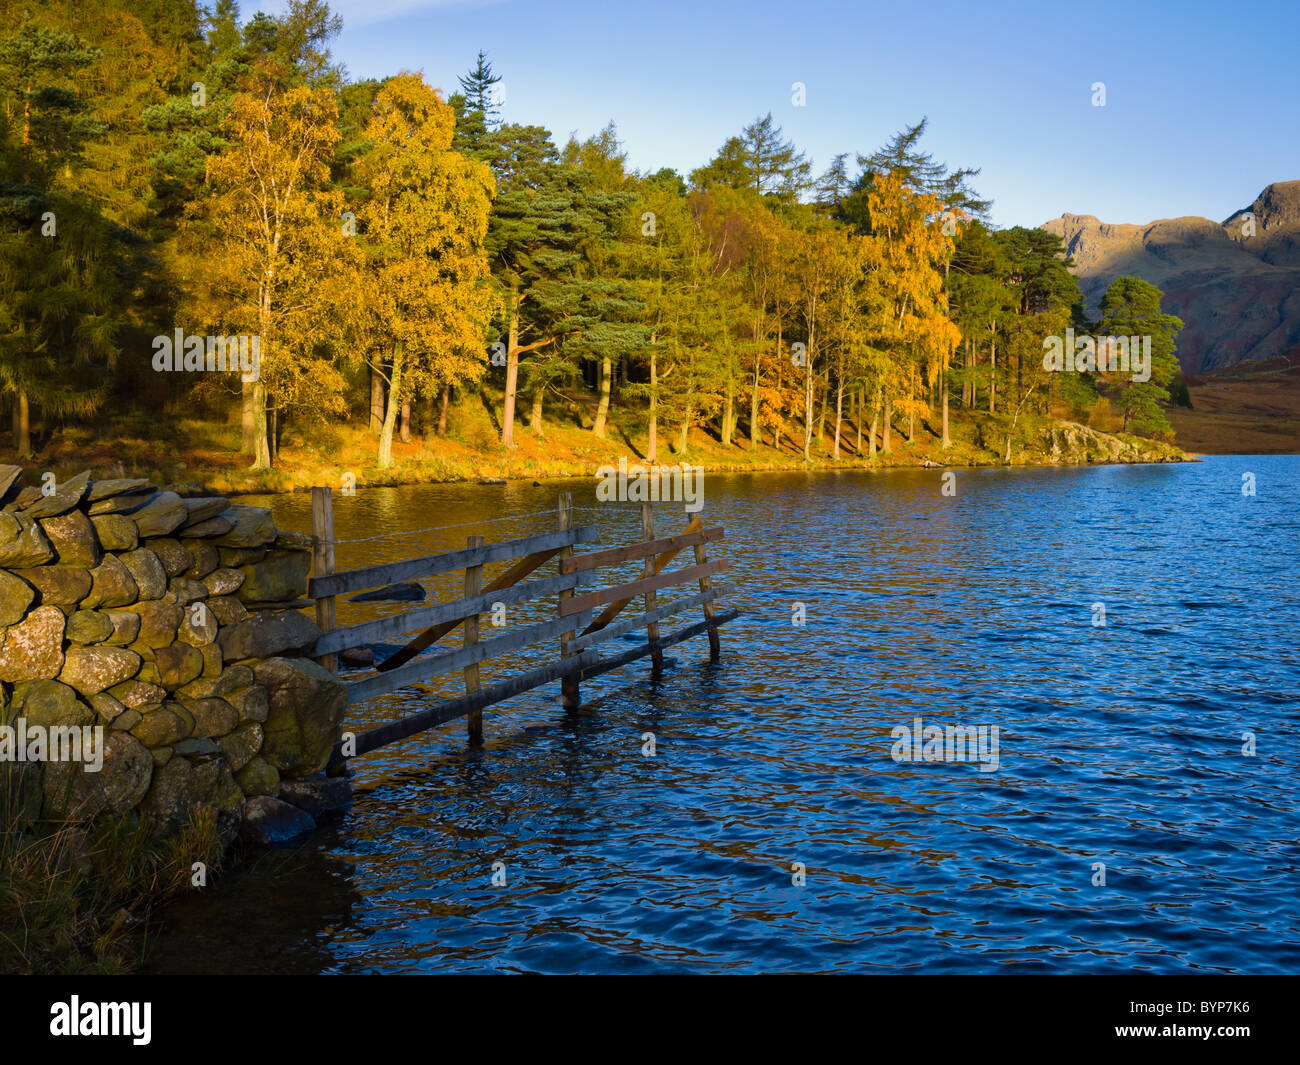 Autumn morning sunlight over Blea Tarn in the Lake District National Park near Little Langdale, Cumbria, England. Stock Photo